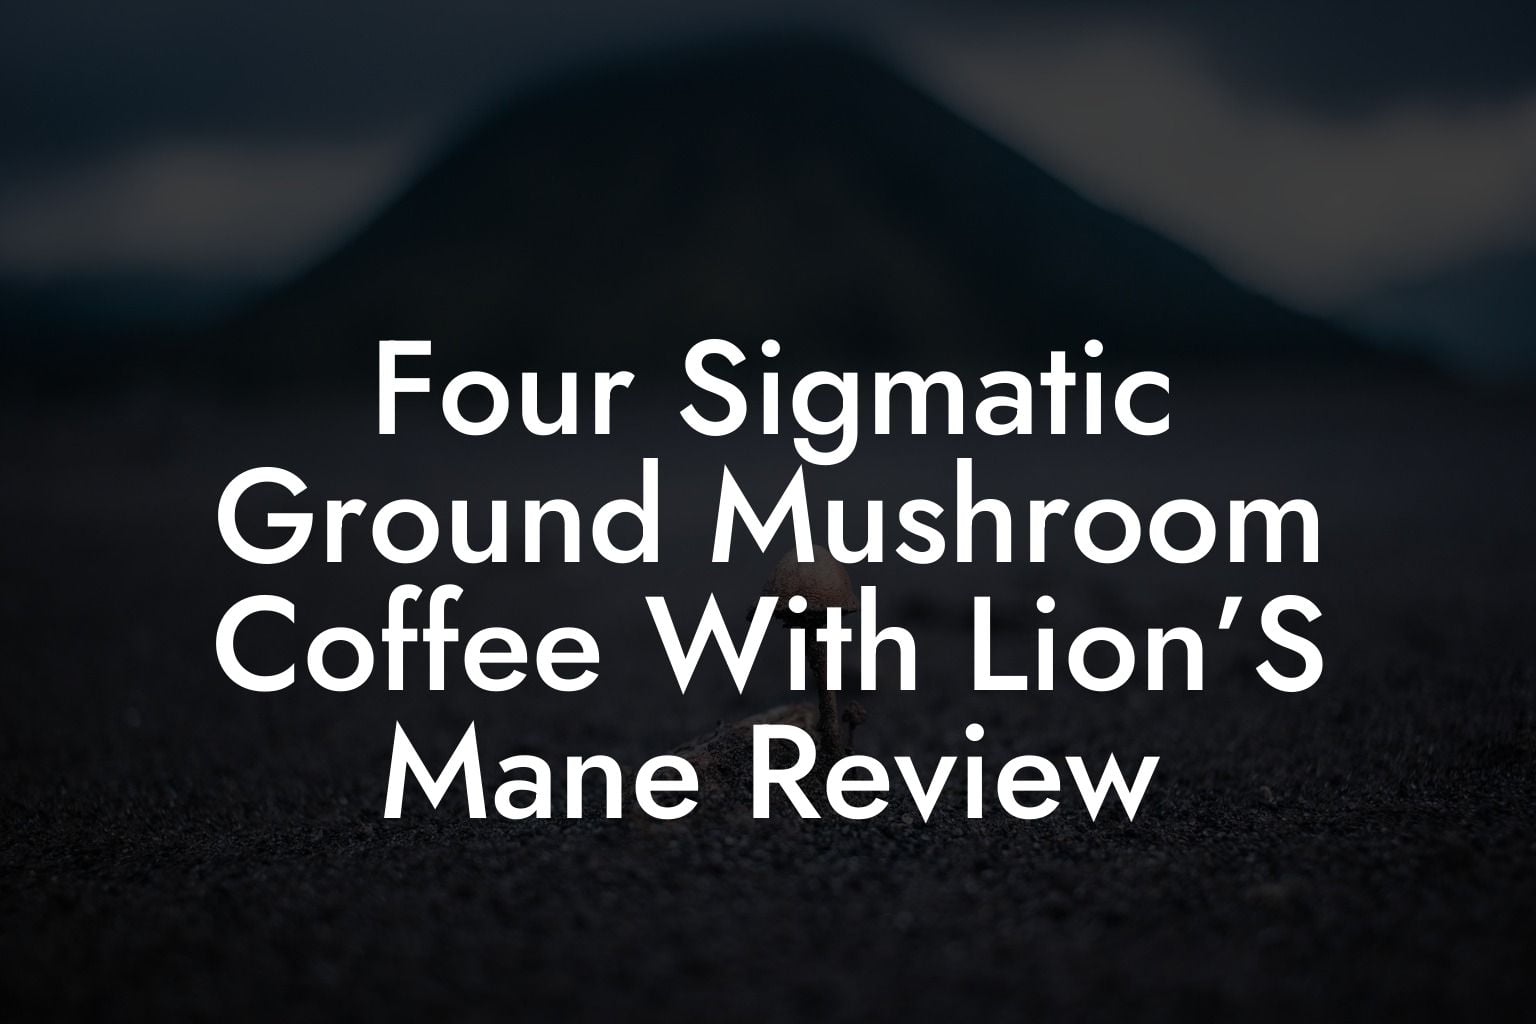 Four Sigmatic Ground Mushroom Coffee With Lion’S Mane Review